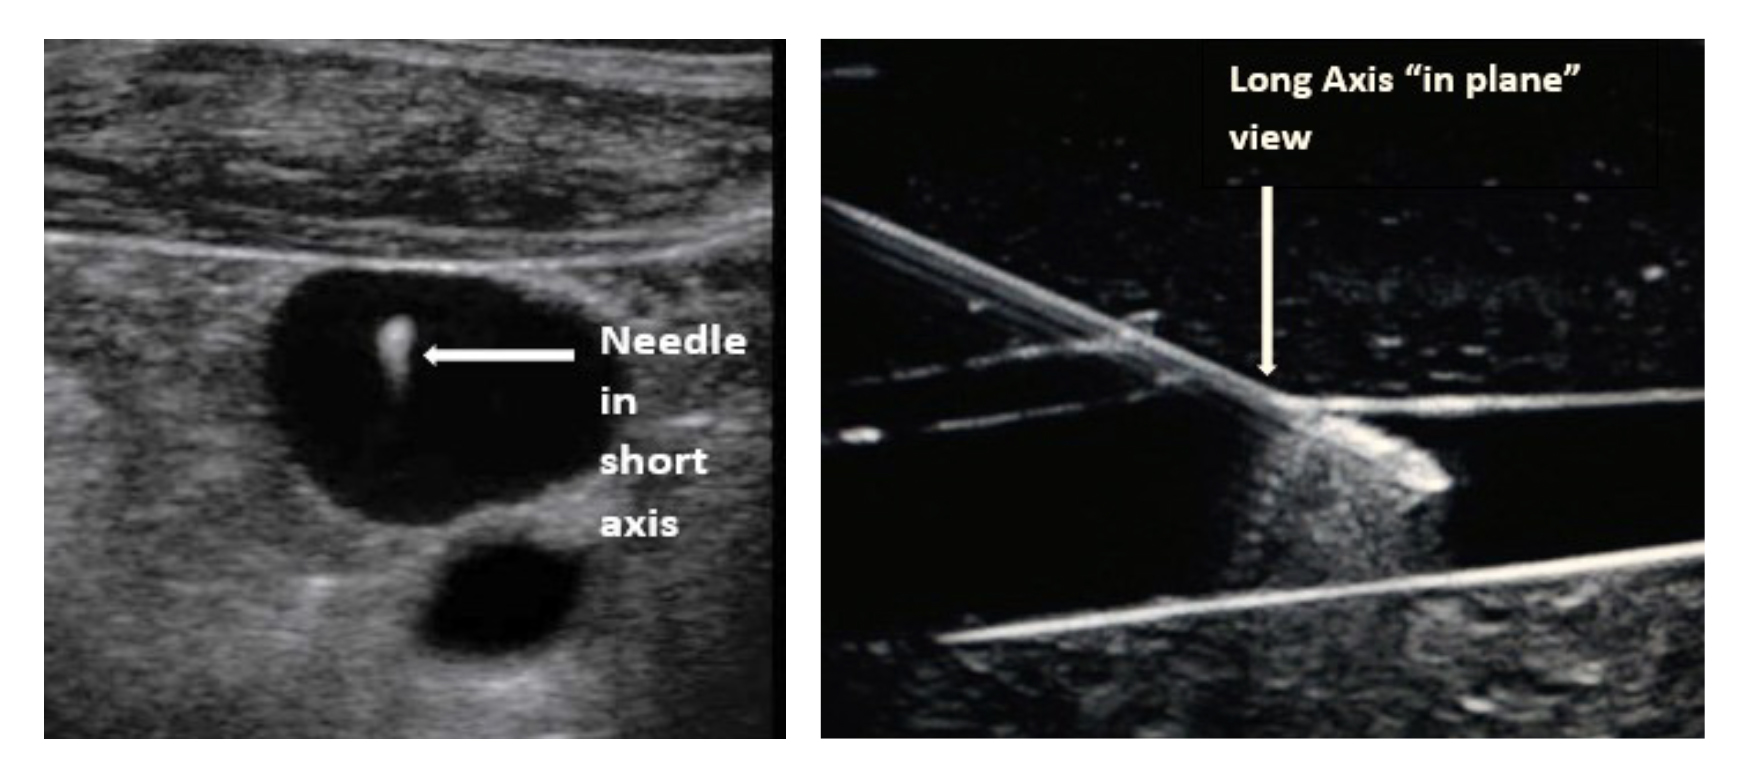 The benefits of Ultrasound Guidance when used to aid in central venous, peripheral venous, or arterial access.